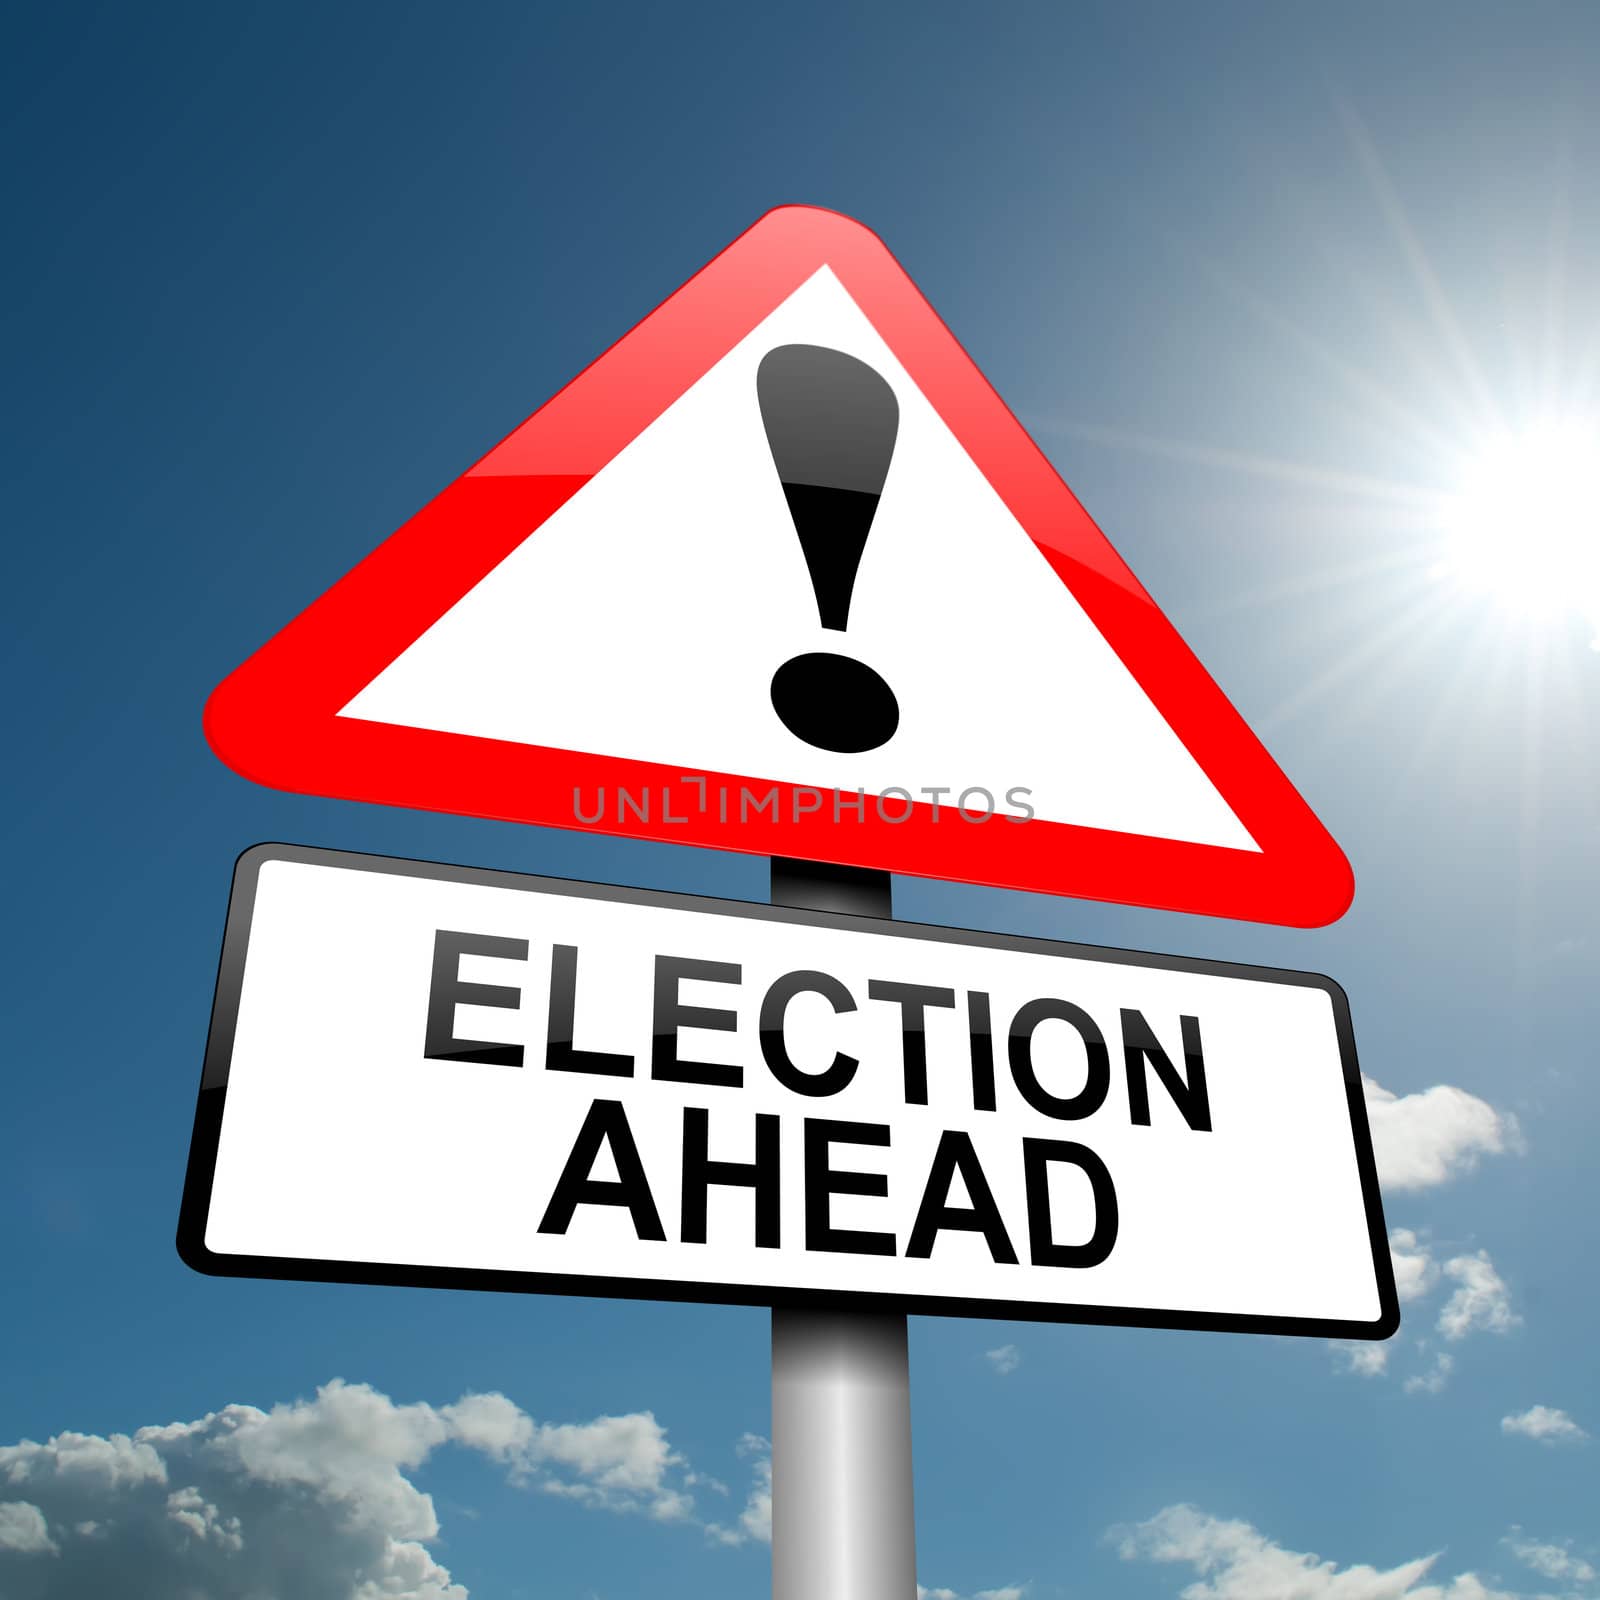 Illustration depicting a road traffic sign with a election concept. Blue sky background.